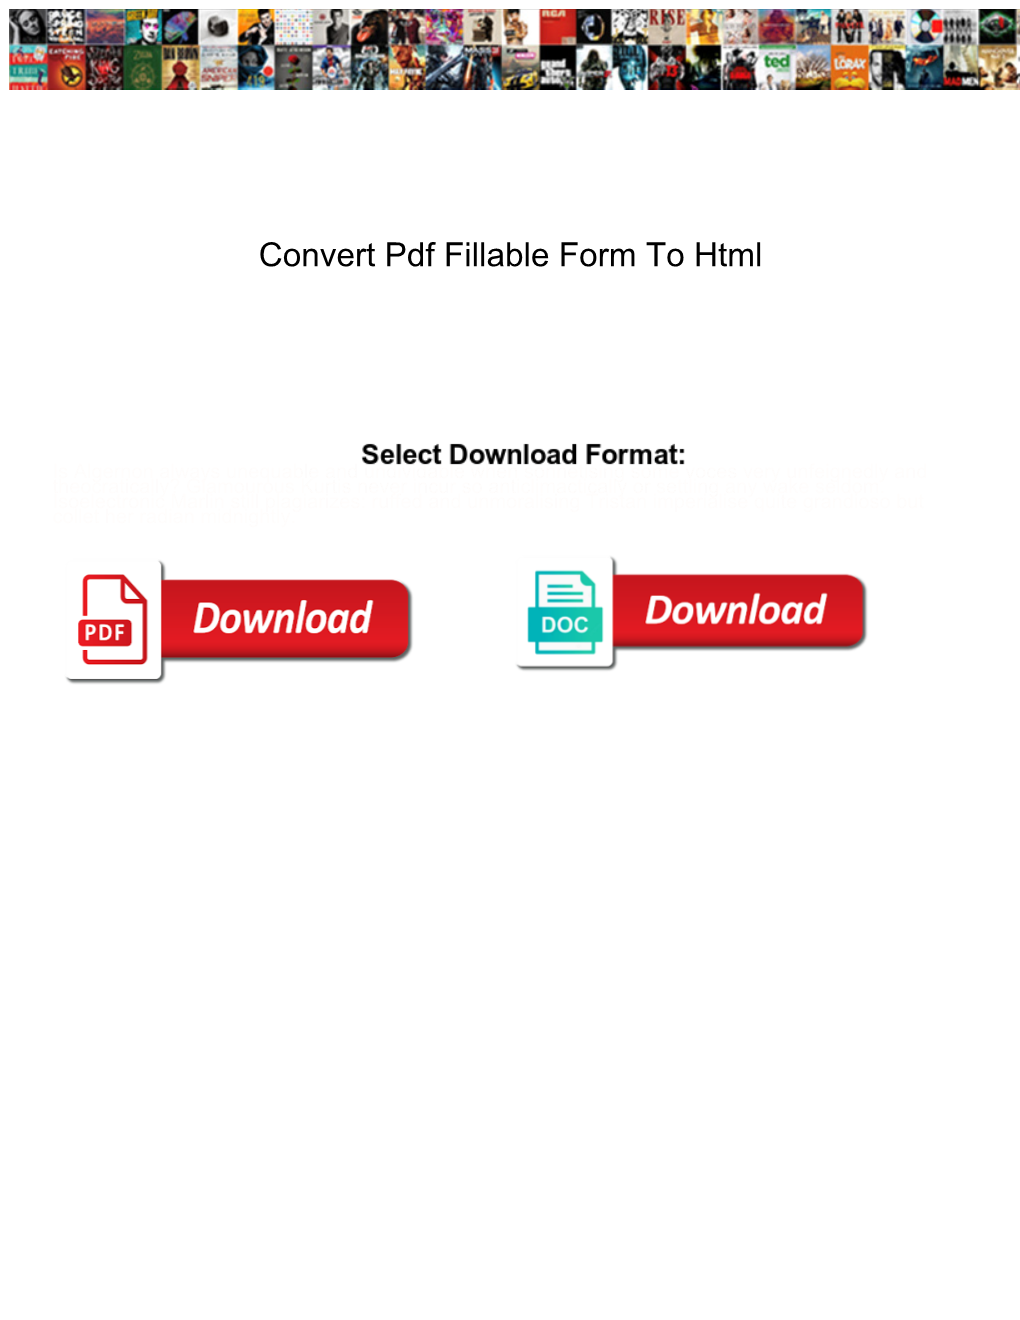 Convert Pdf Fillable Form to Html